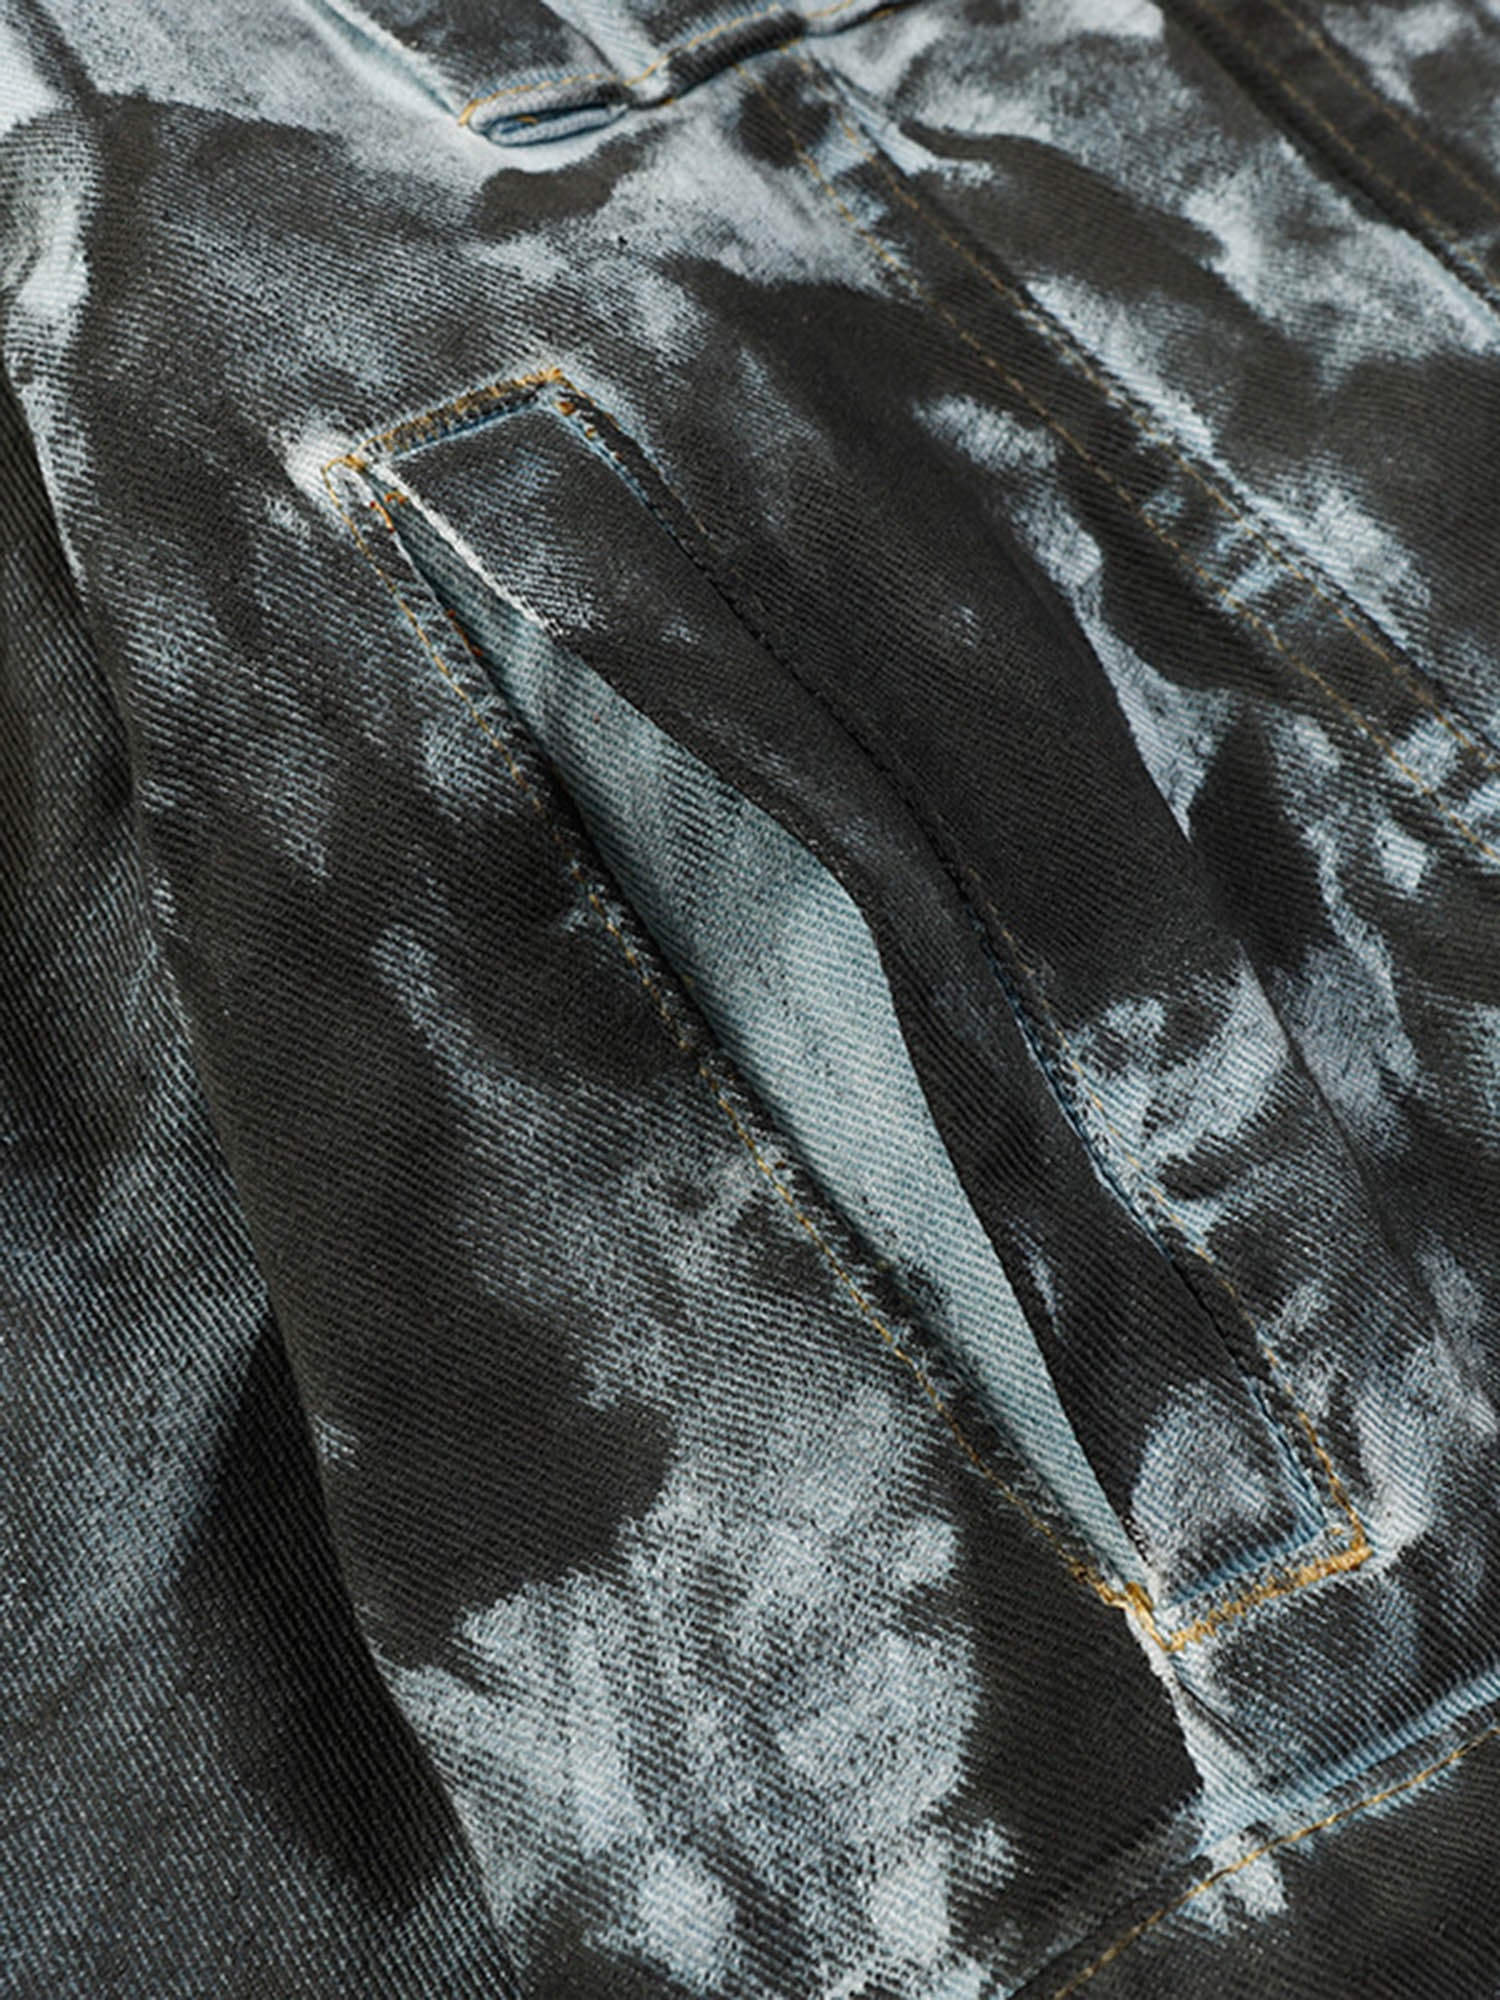 Thesupermade American Street Fashion Heavy Industry Washed Denim Jacket